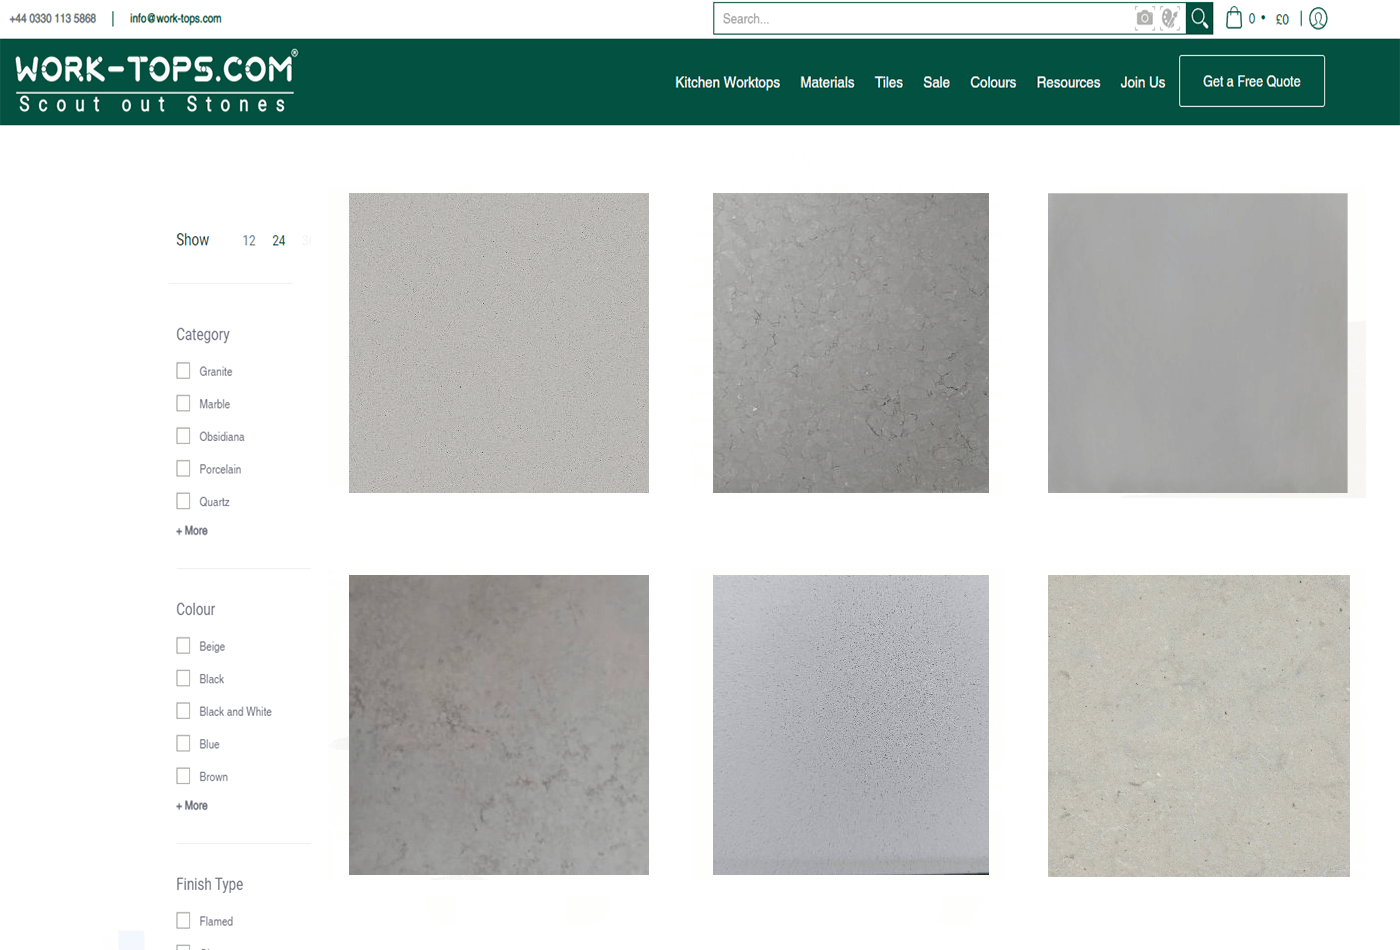 Try Out these New Slabs from Work-tops.com